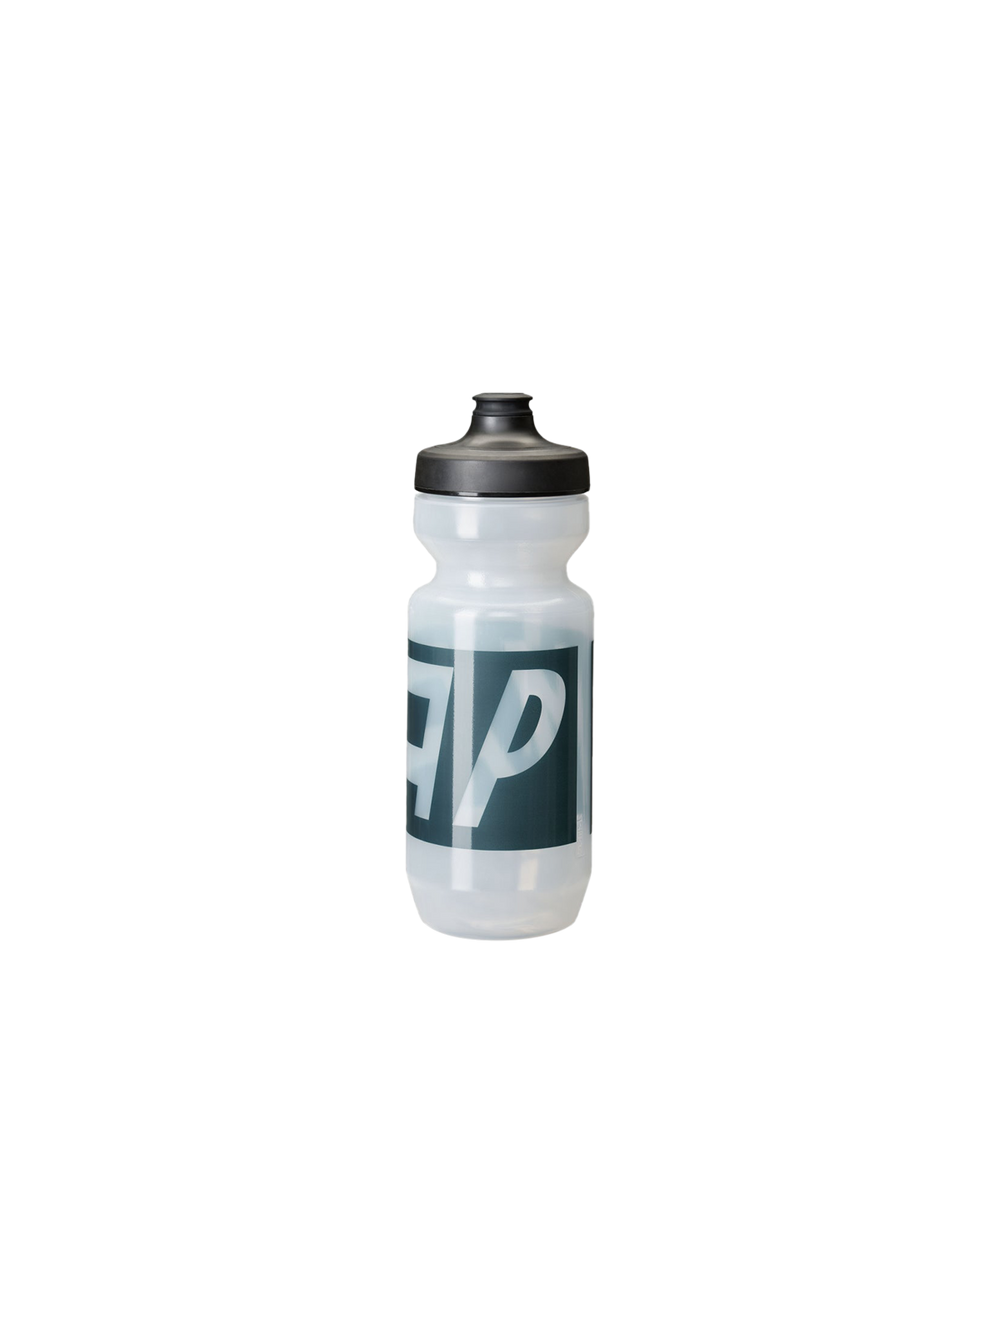 Product Image for Adapt Bottle